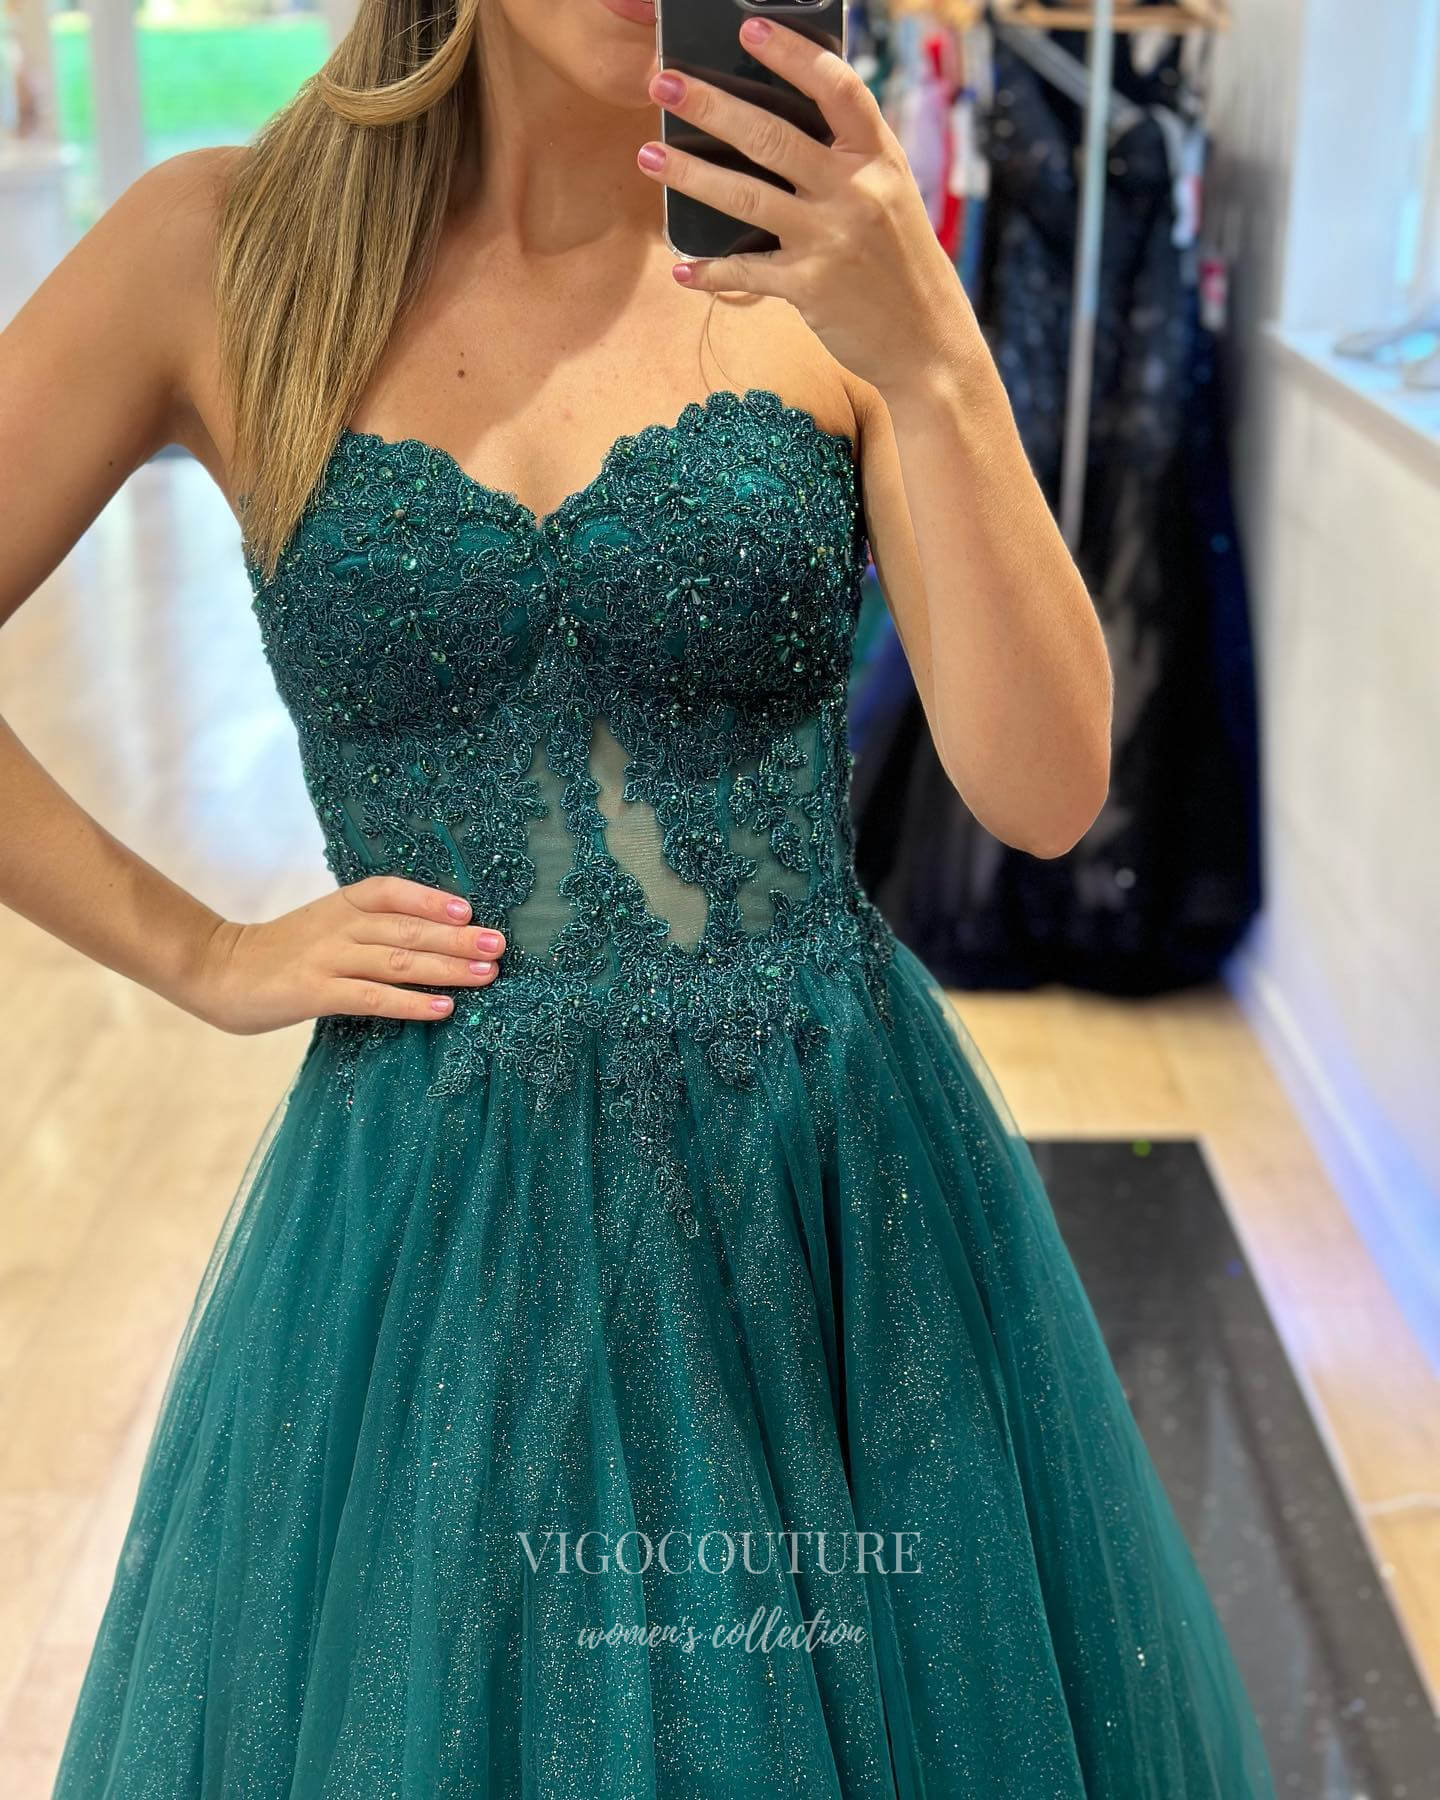 Green Lace Applique Prom Dresses Sparkly Tulle Strapless Evening Dress 21992-Prom Dresses-vigocouture-Green-US2-vigocouture